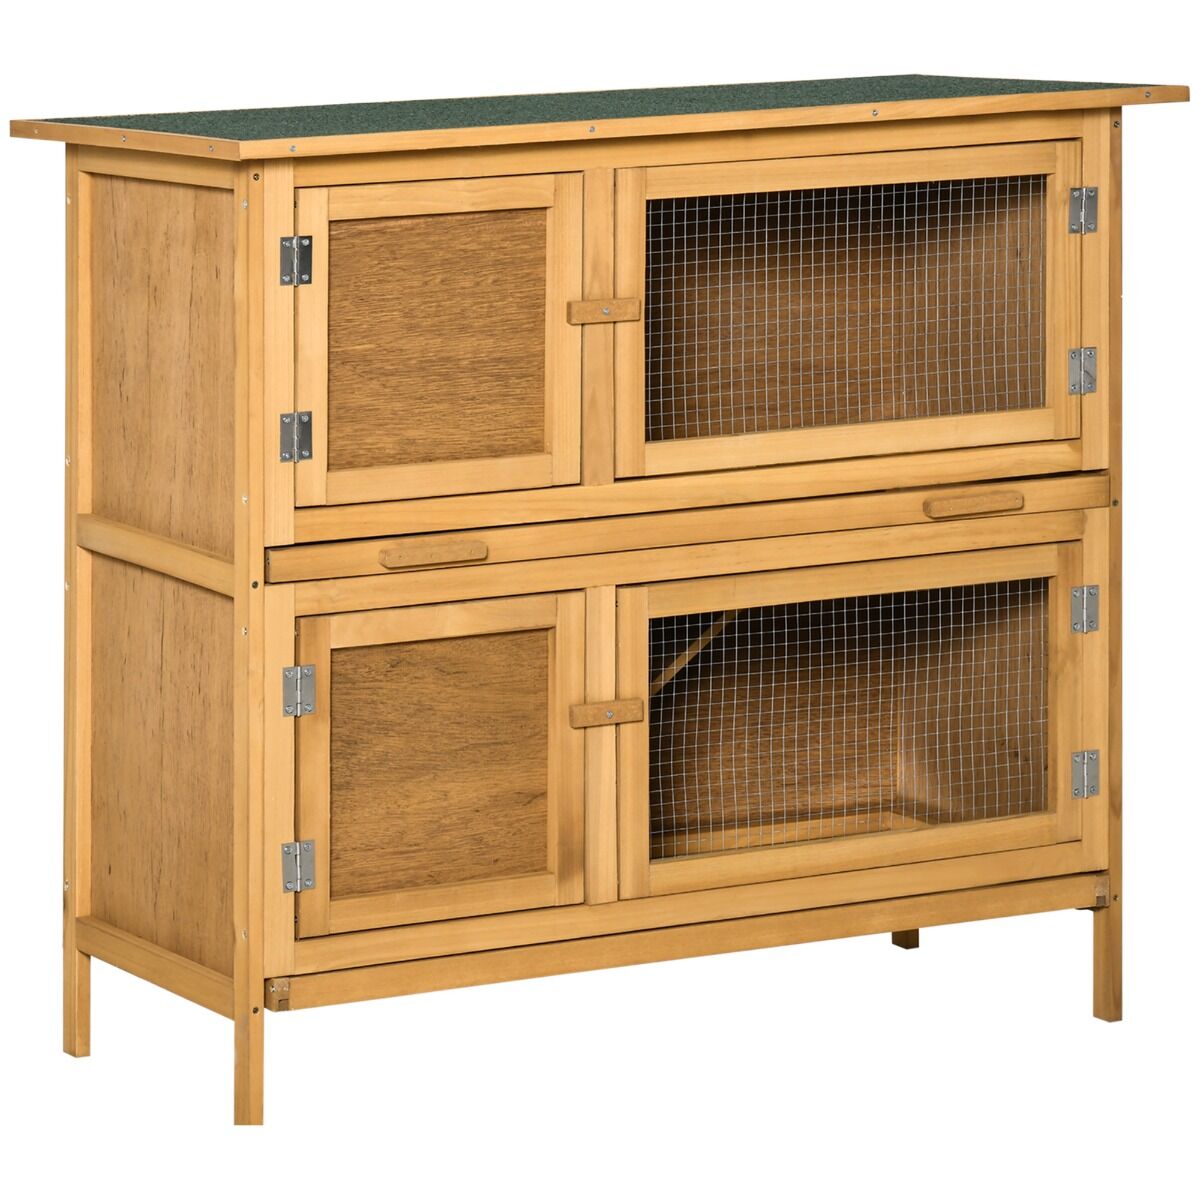 PawHut Bunny Hutch Rabbit Hutch Indoor, Small Animals Habitat with Ramp, Removable Tray and Weatherproof Roof, Yellow